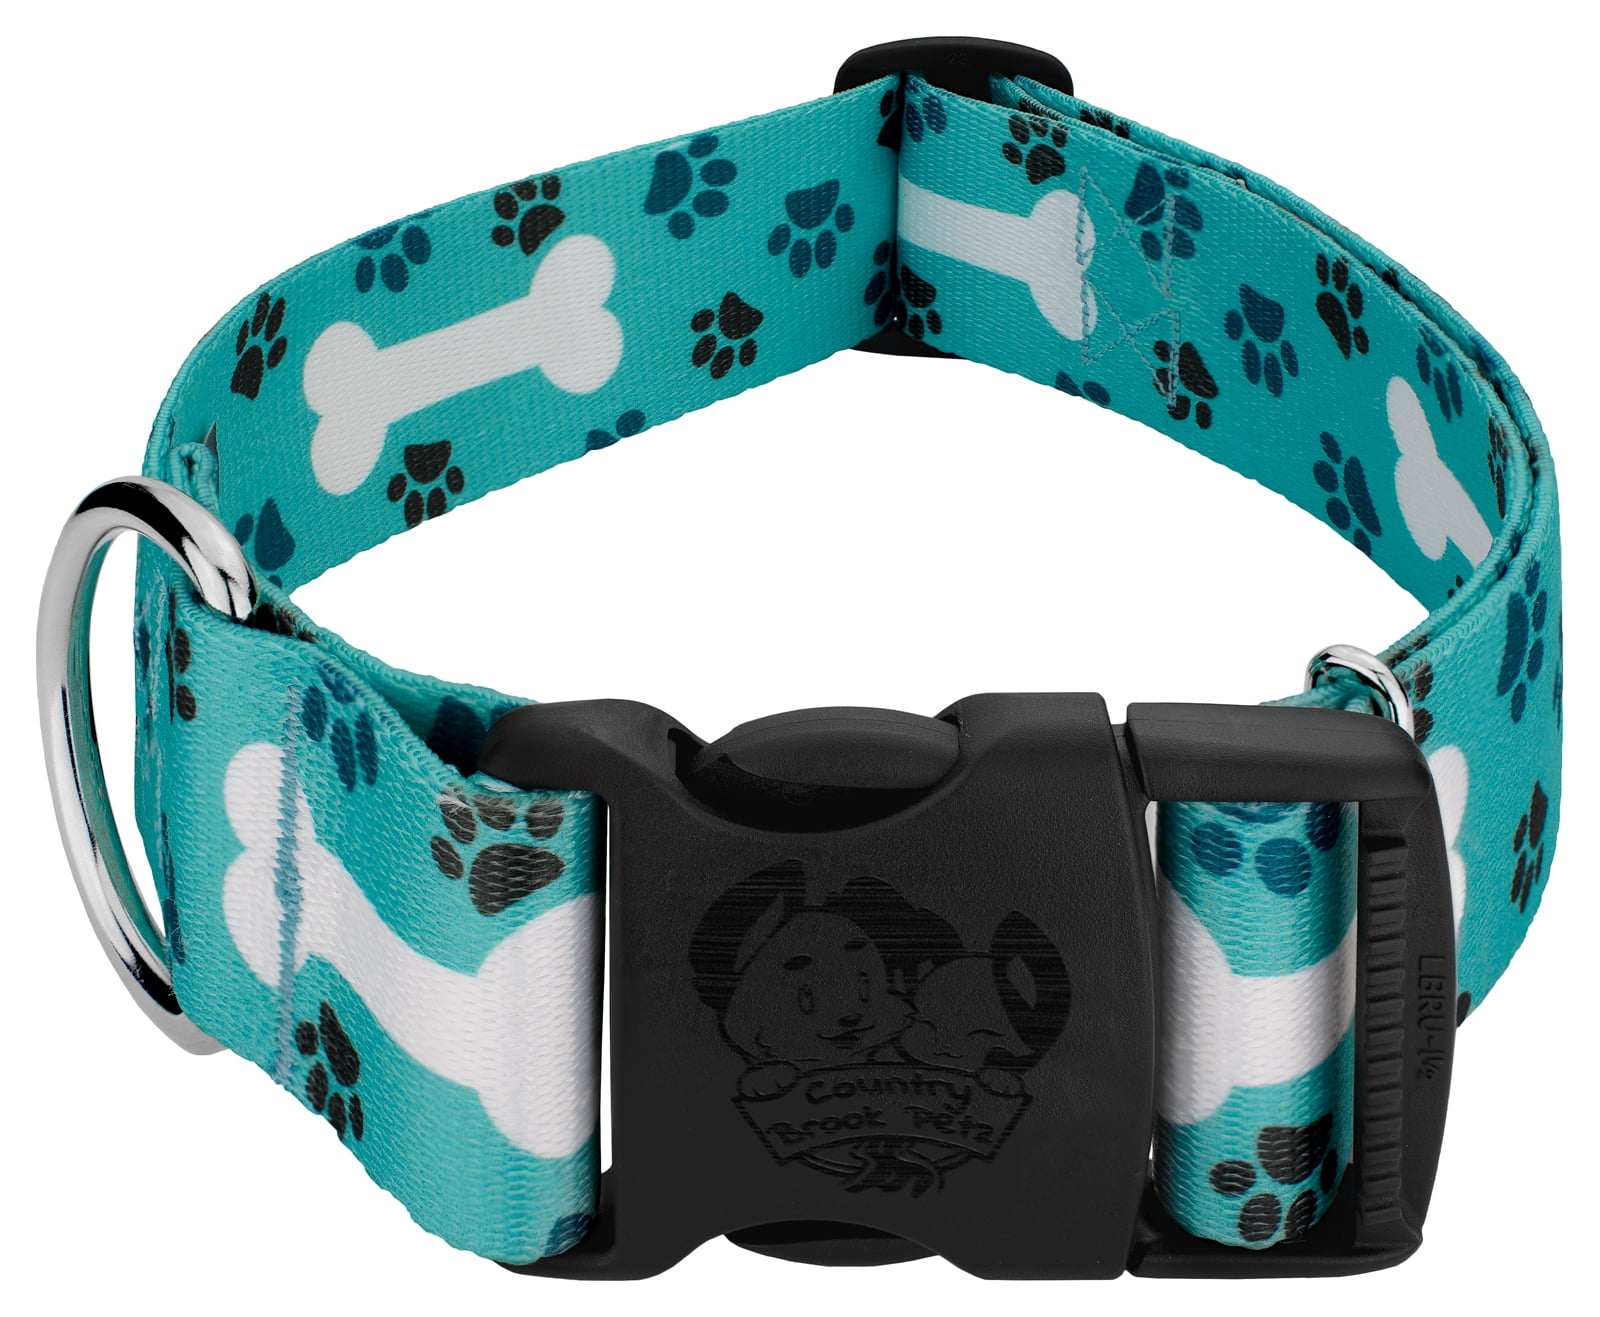 Country Brook Petz® 1 1/2 Inch Deluxe Dog Collar Floral Collection 